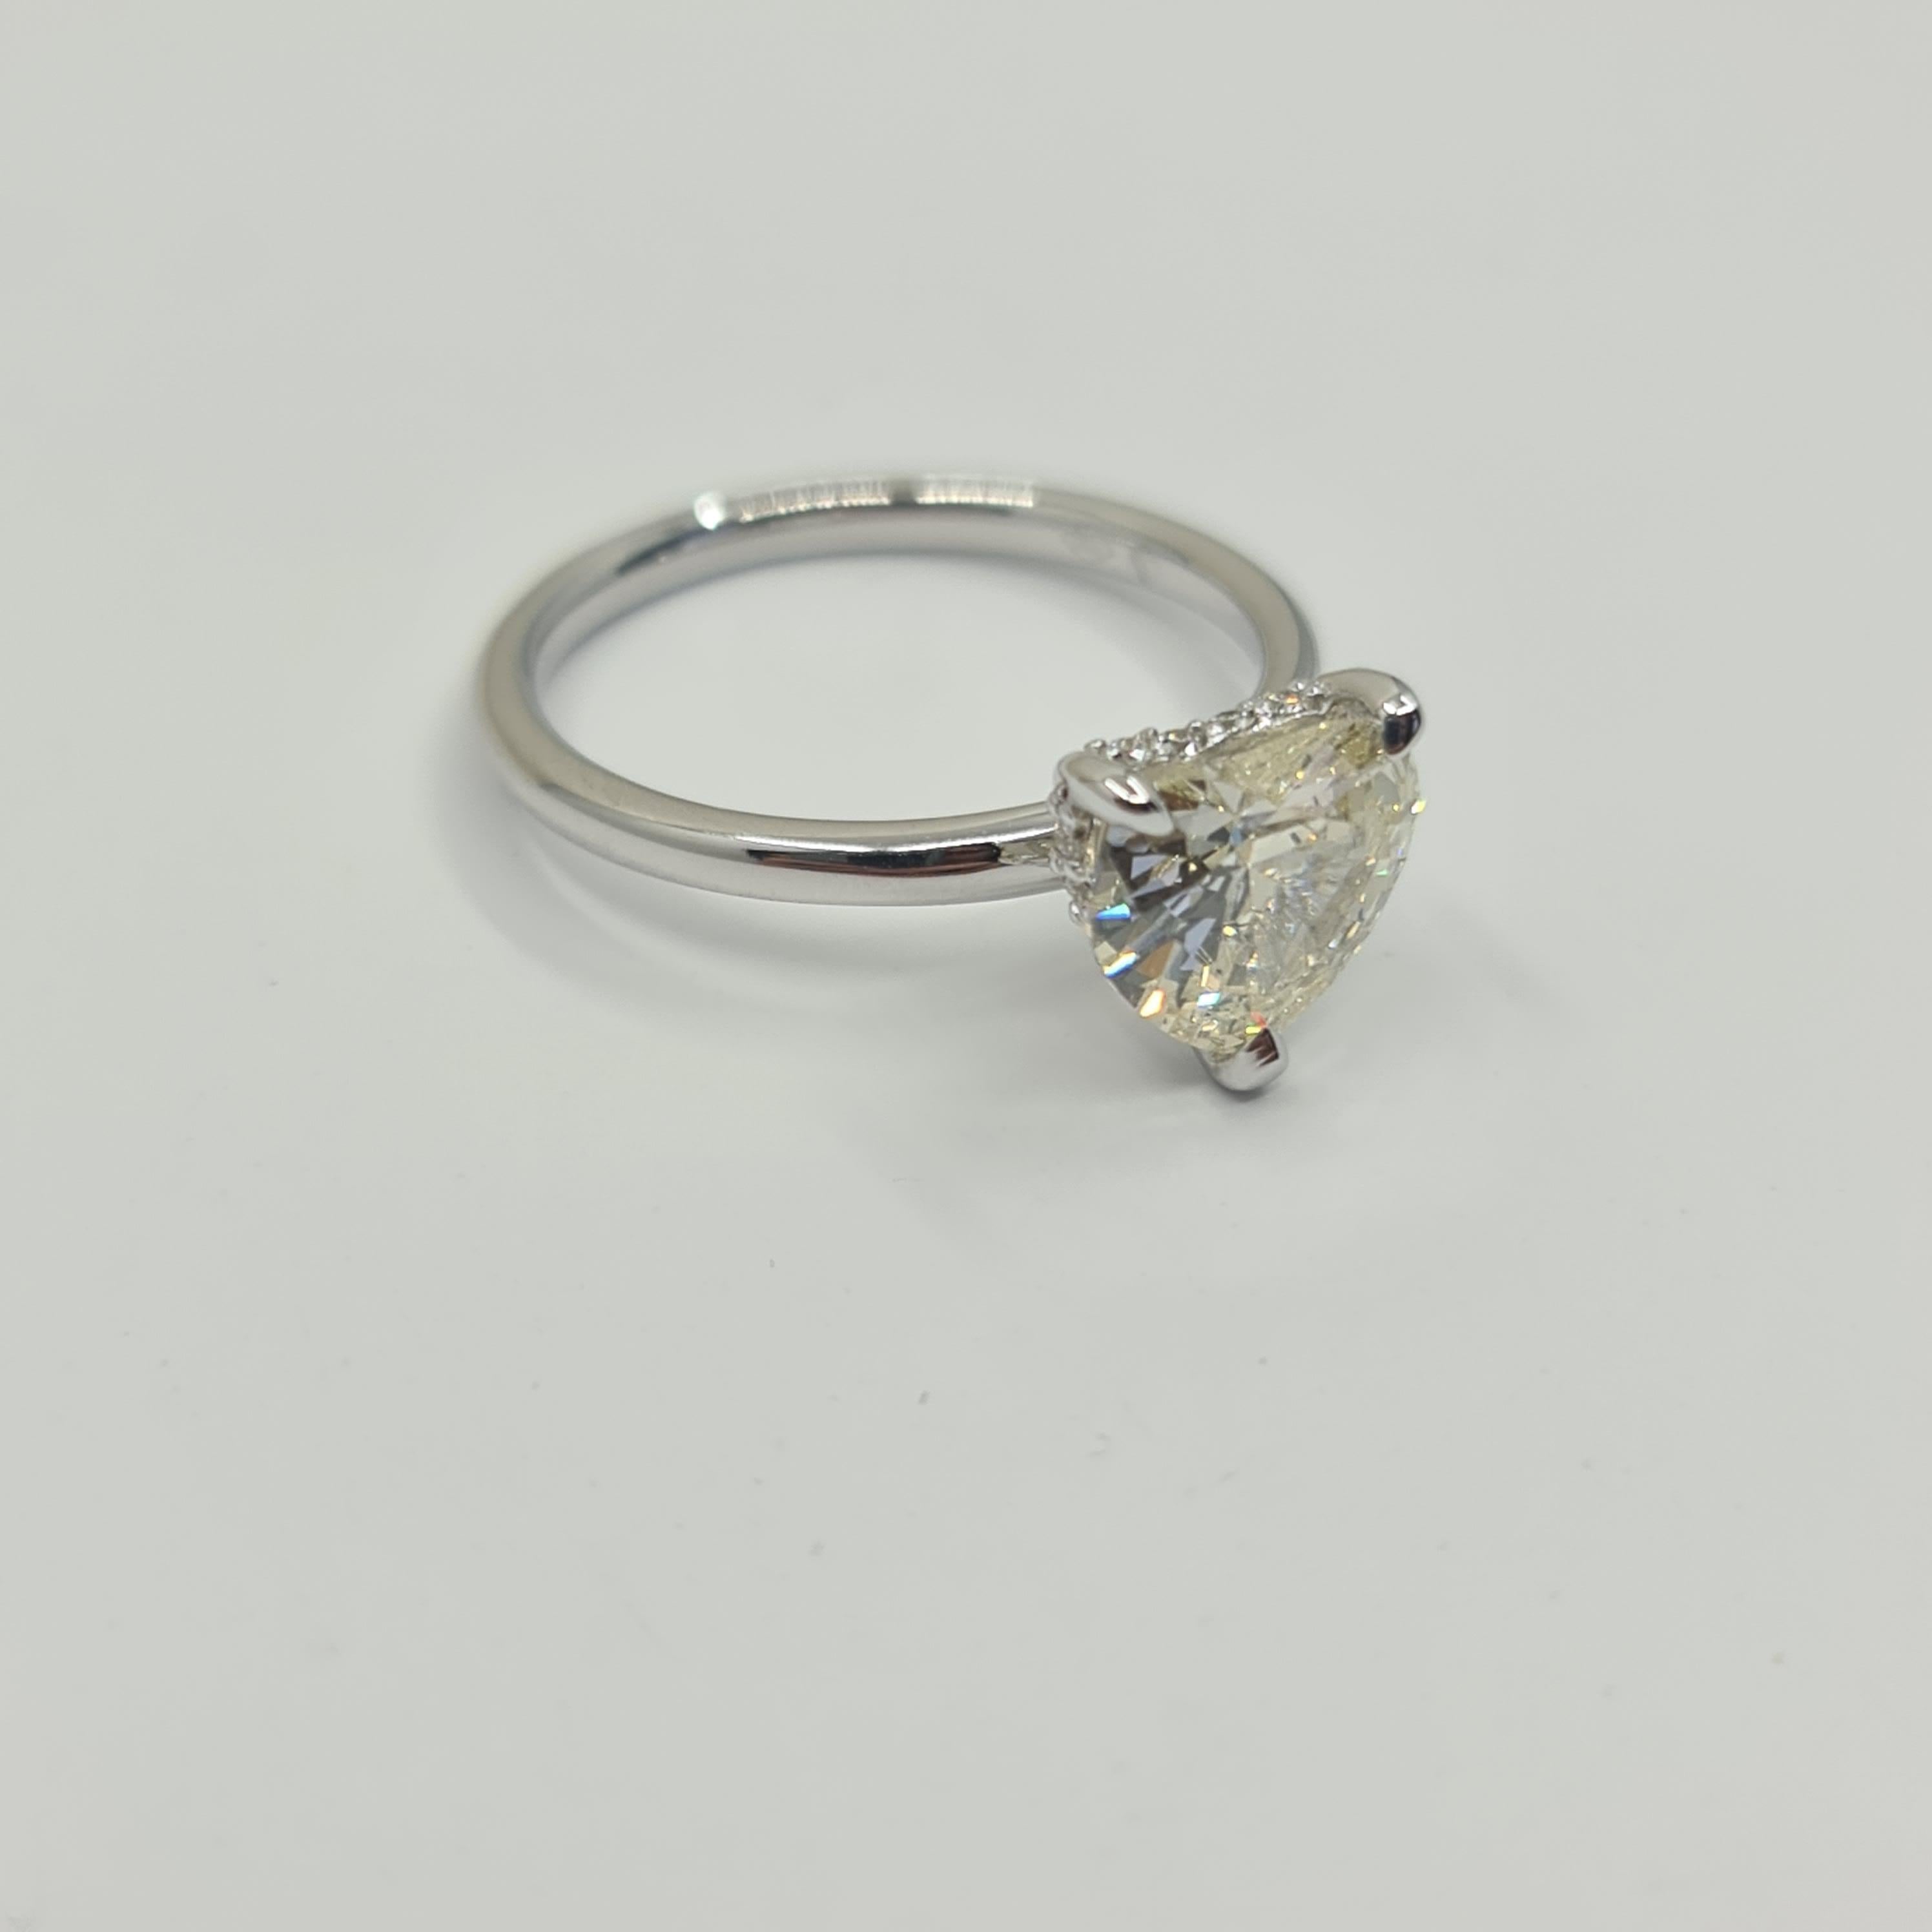 Exquisite GIA Certified 1.60 Carat Heart Diamond Ring with 0.07 Carat Halo G/VS For Sale 2